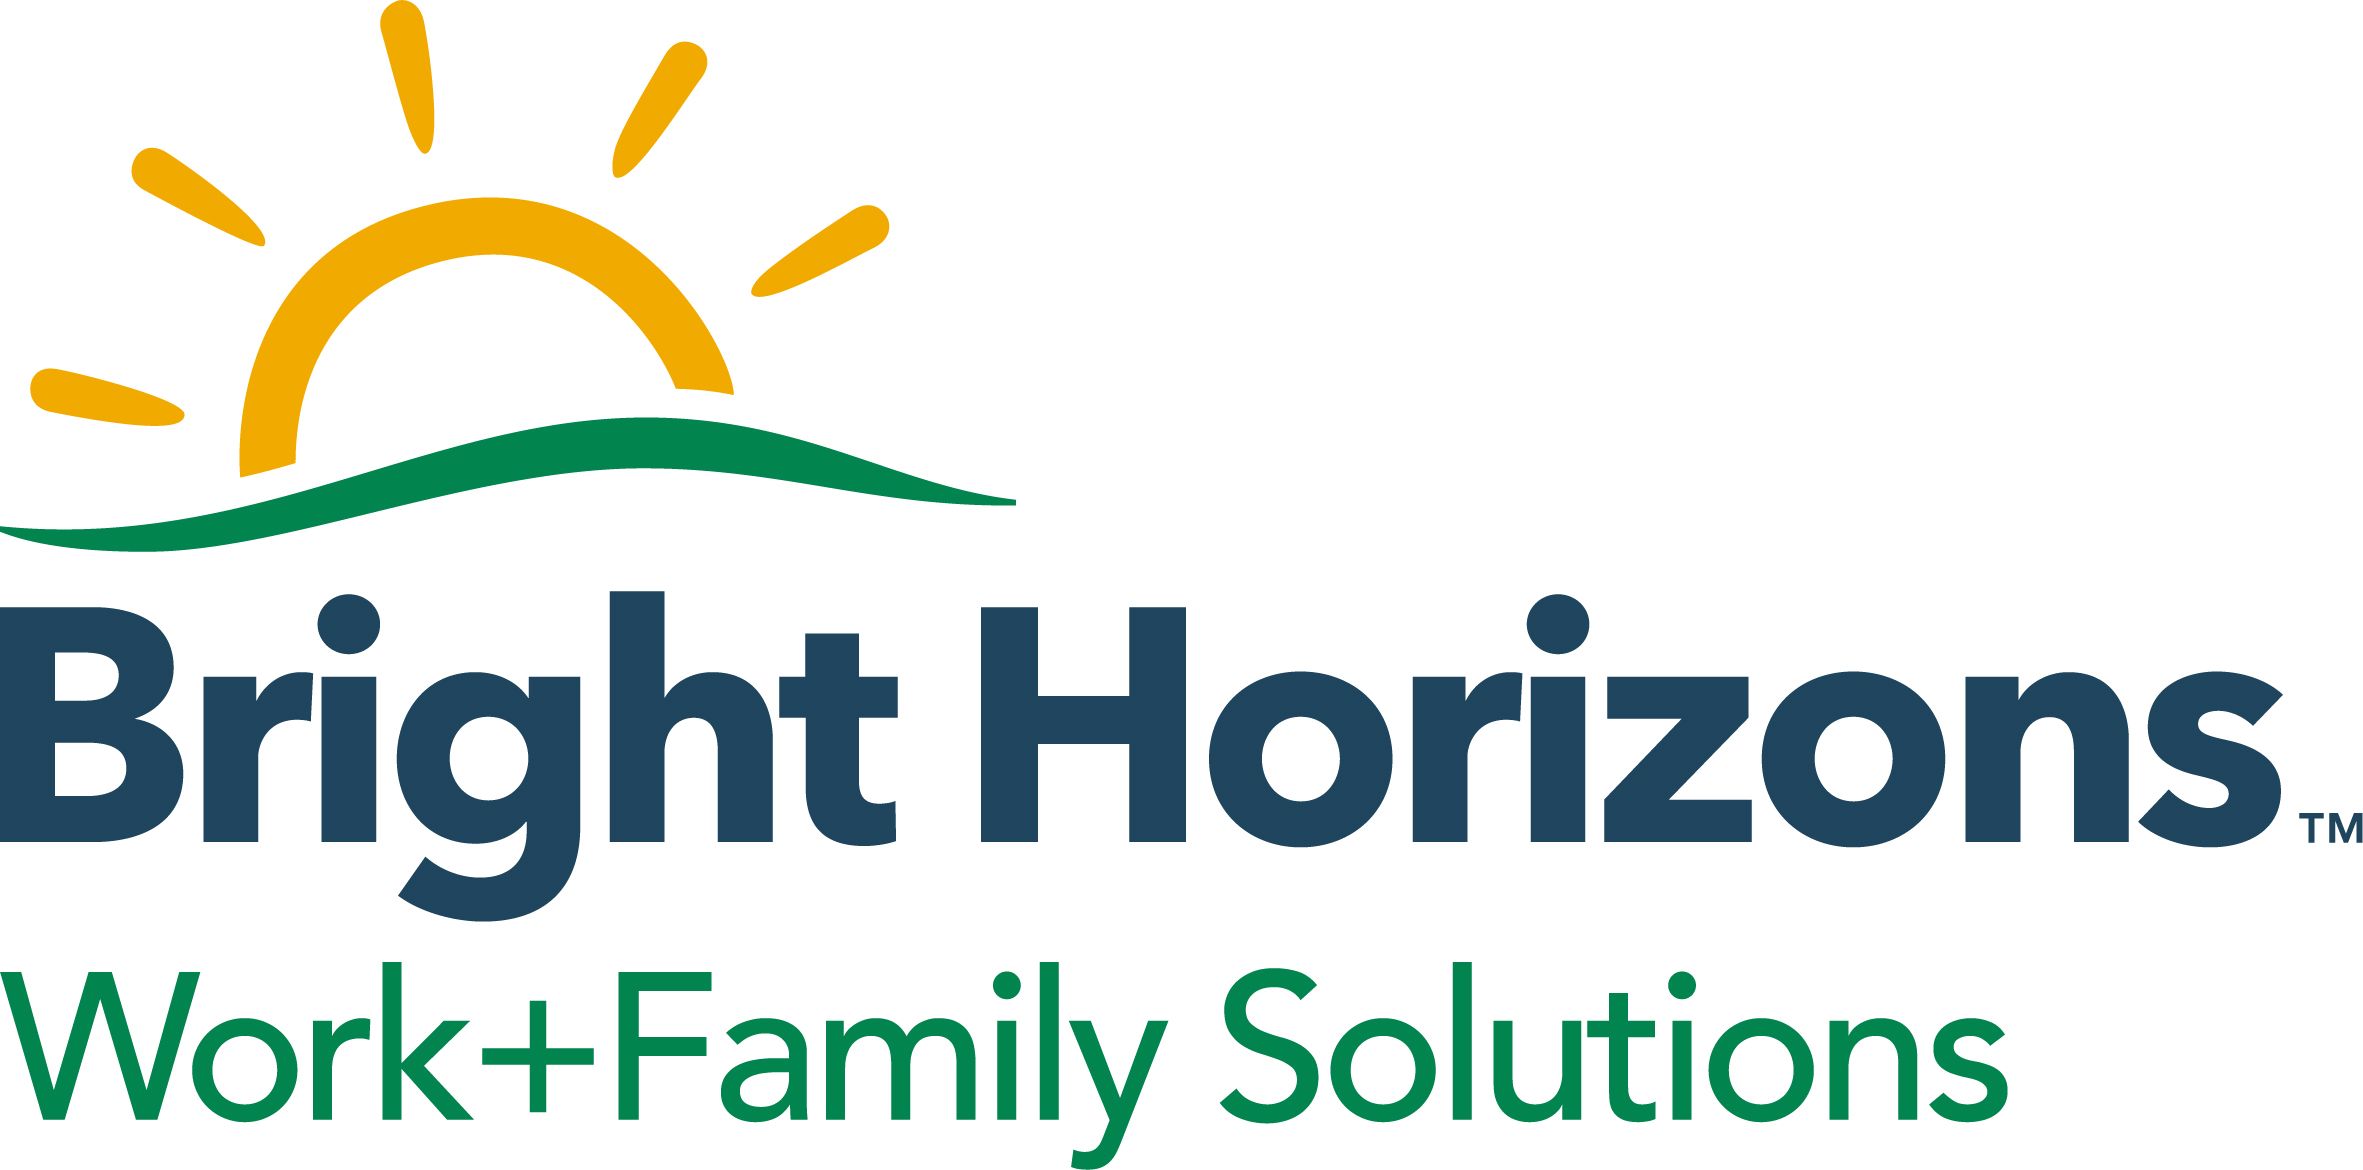 Bright Horizons Work+Family Solutions